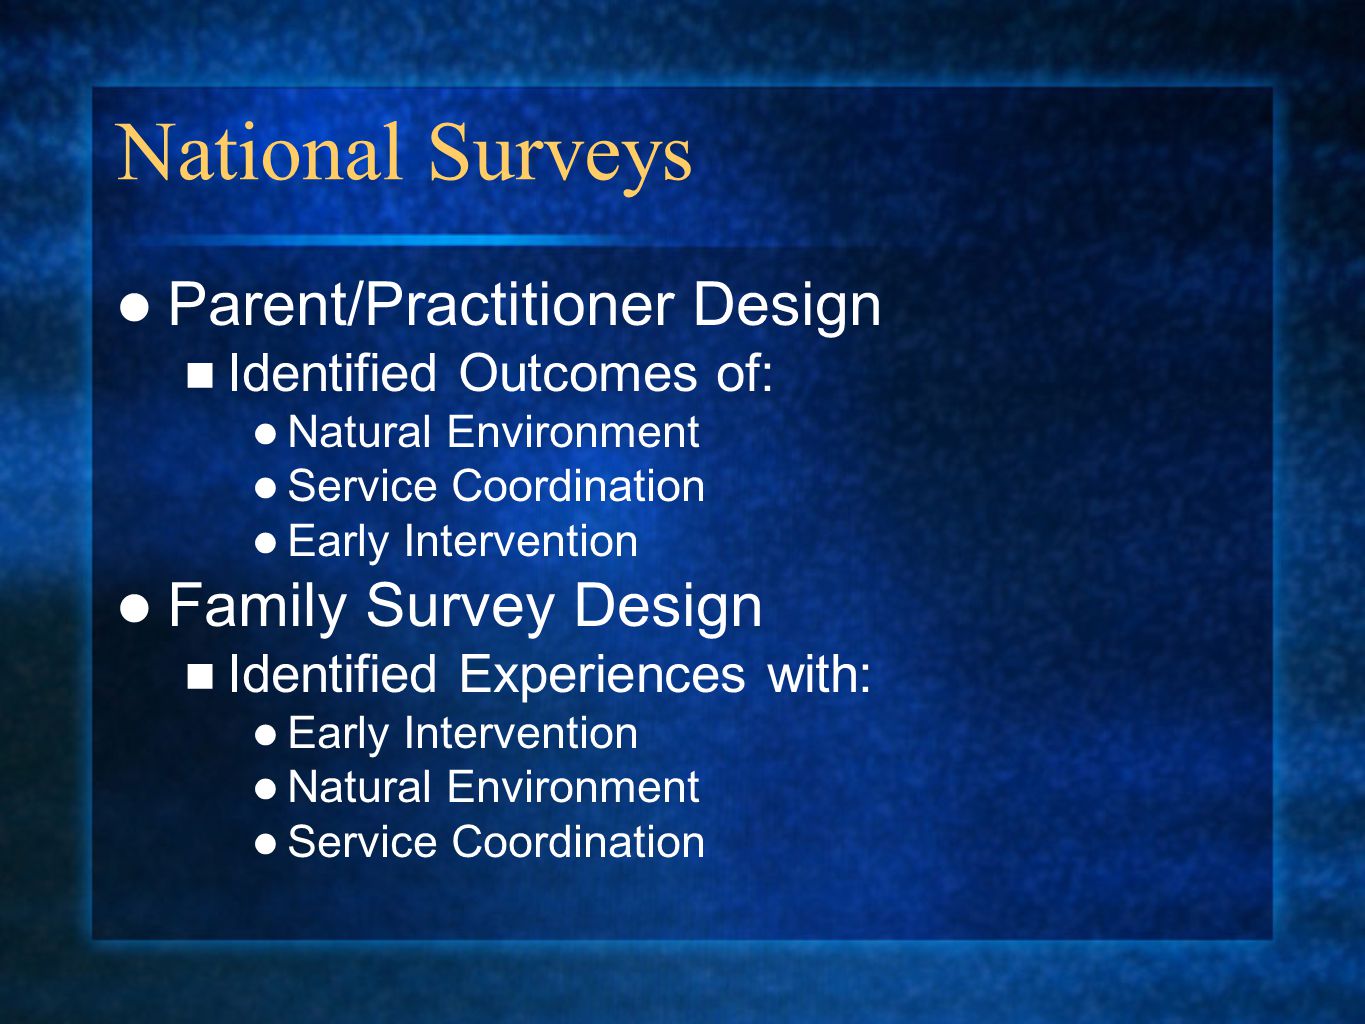 National Surveys Parent/Practitioner Design Identified Outcomes of: Natural Environment Service Coordination Early Intervention Family Survey Design Identified Experiences with: Early Intervention Natural Environment Service Coordination